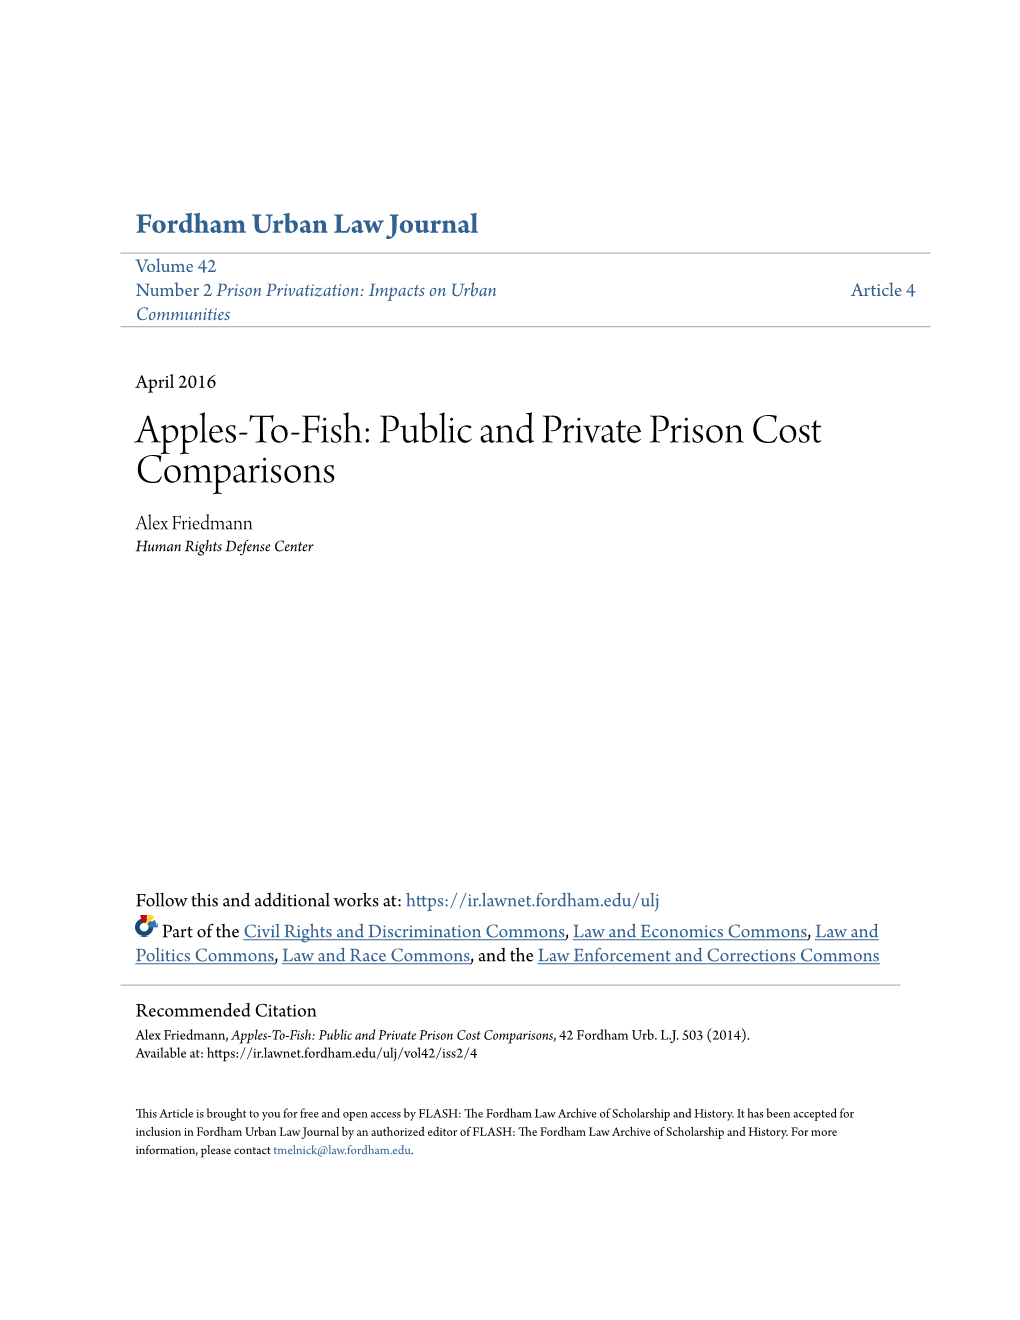 Apples-To-Fish: Public and Private Prison Cost Comparisons Alex Friedmann Human Rights Defense Center